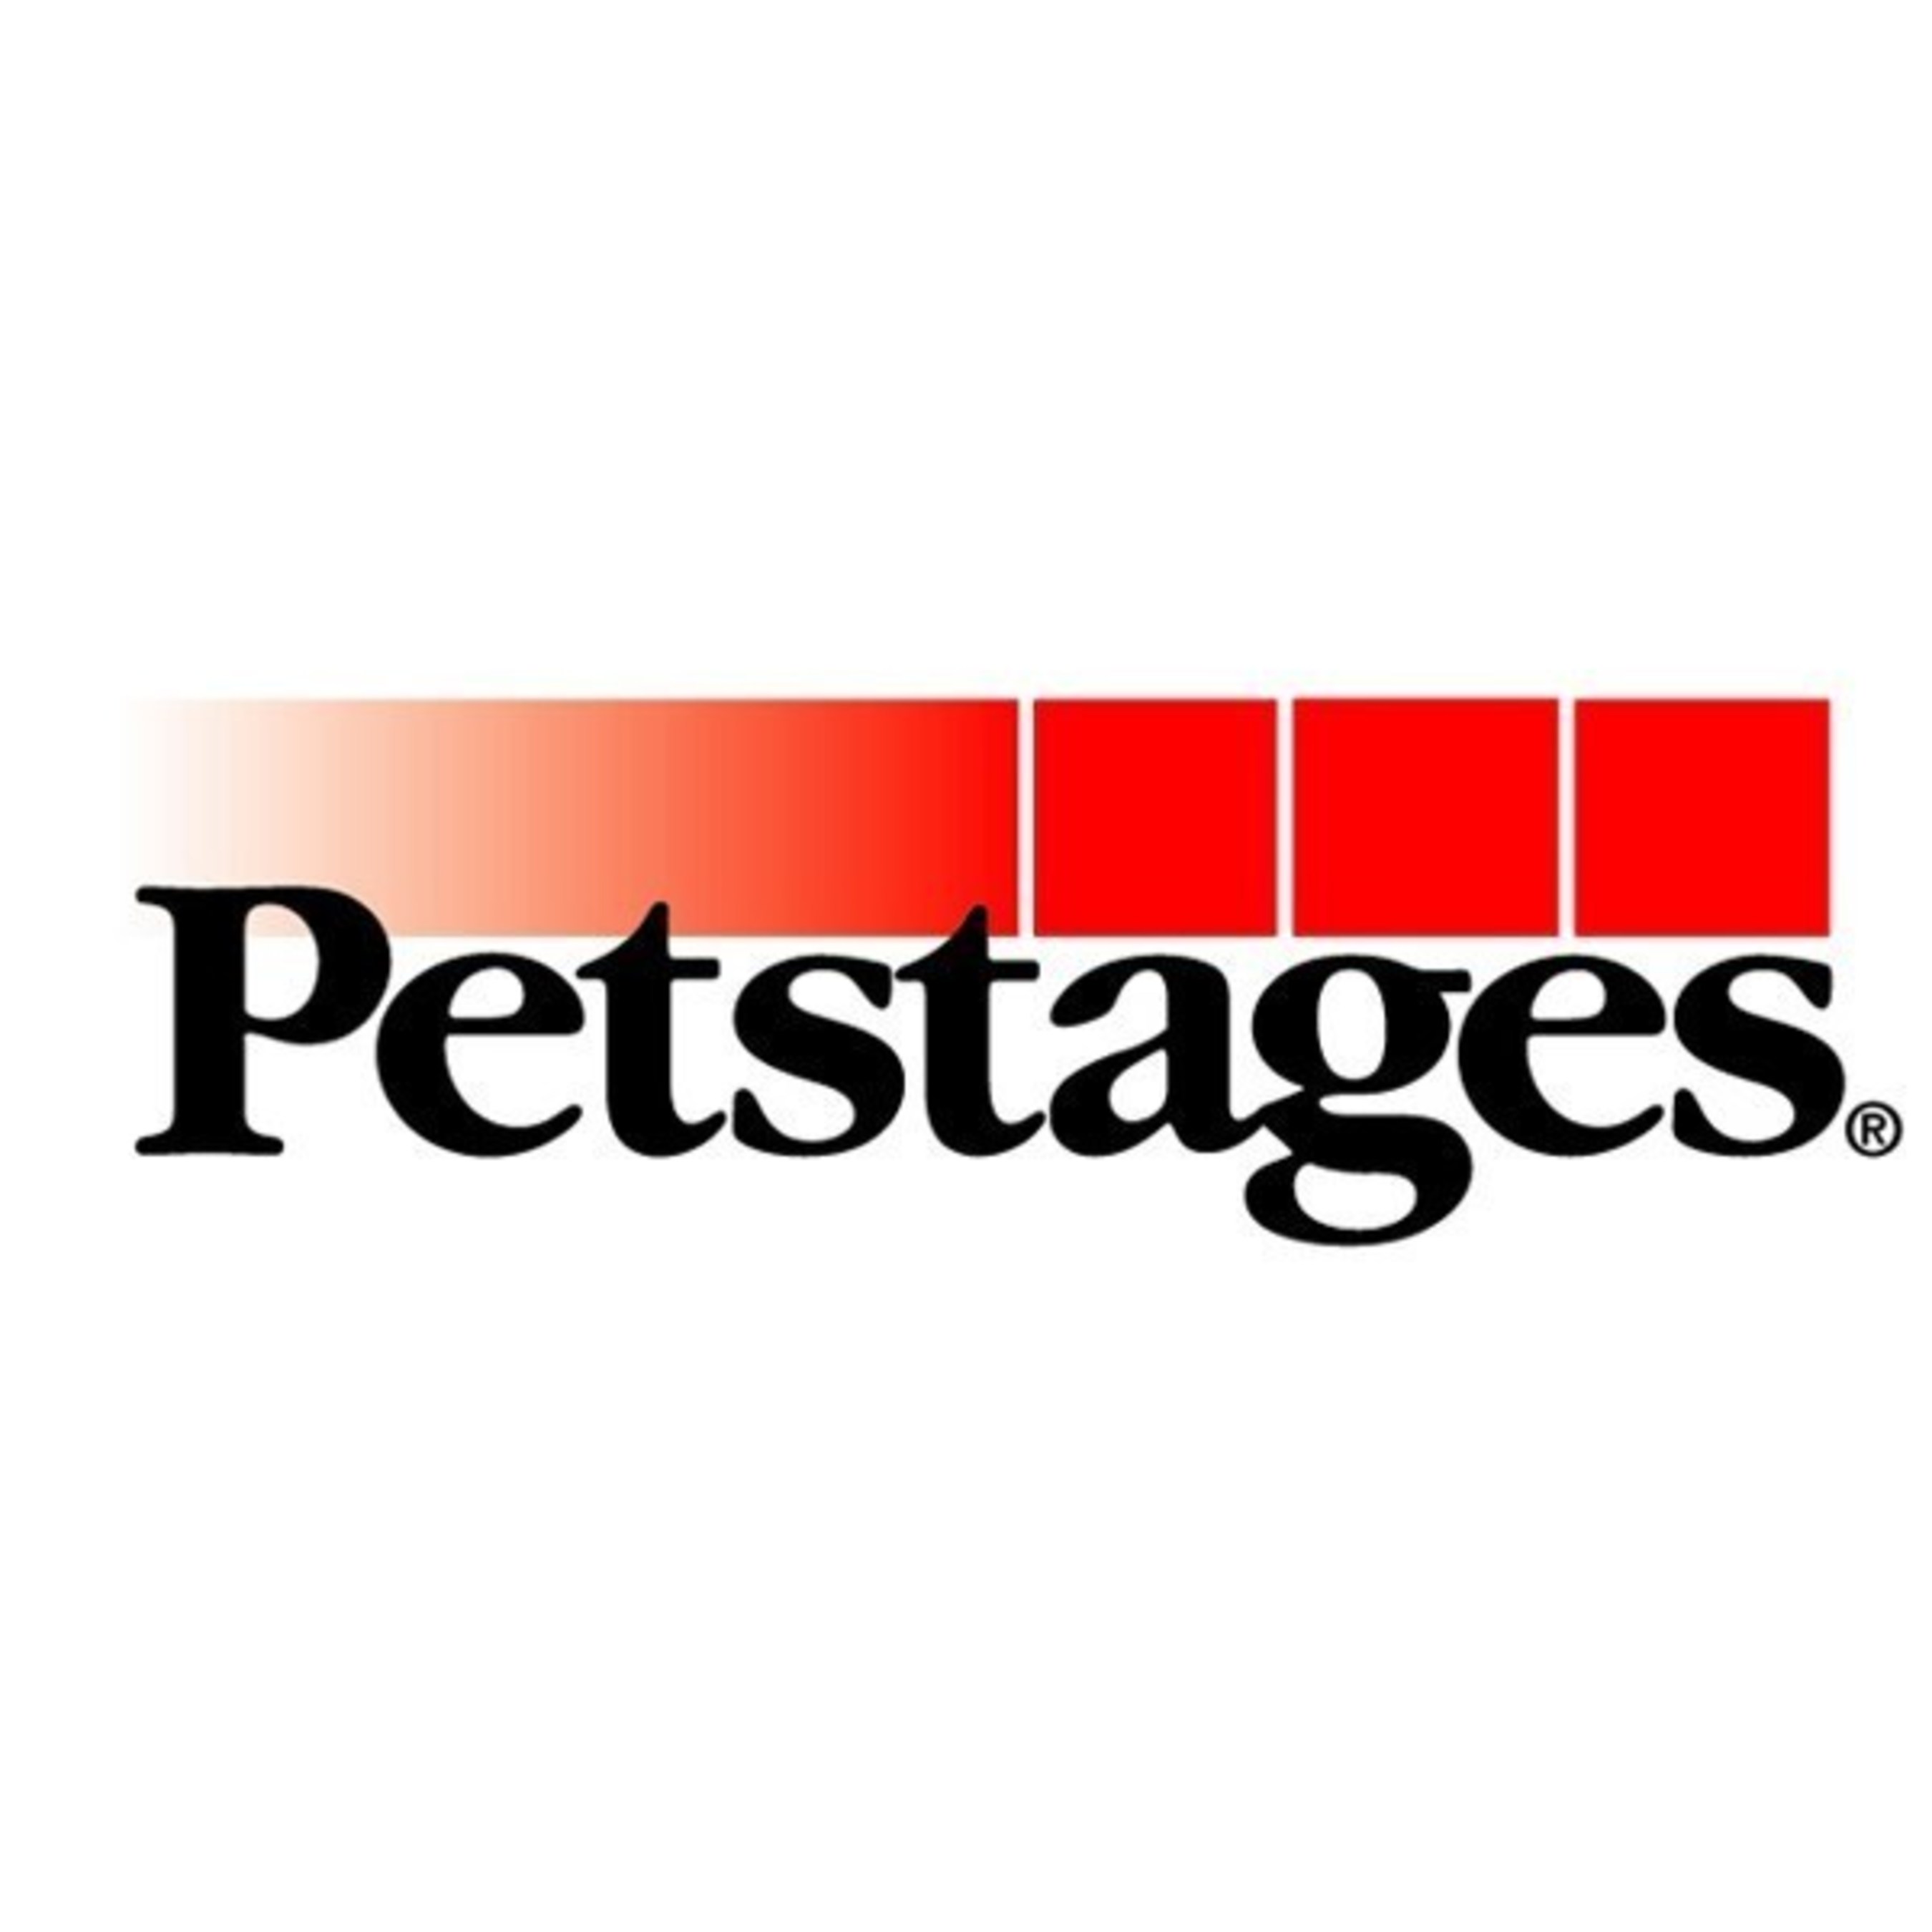 Petstages has developed a popular line of products, including the Dogwood(R) Chew Stick, Orka(R) chew toys and INVIRONMENT(R) scratchers, that address the behavioral needs of pets at all life stages.